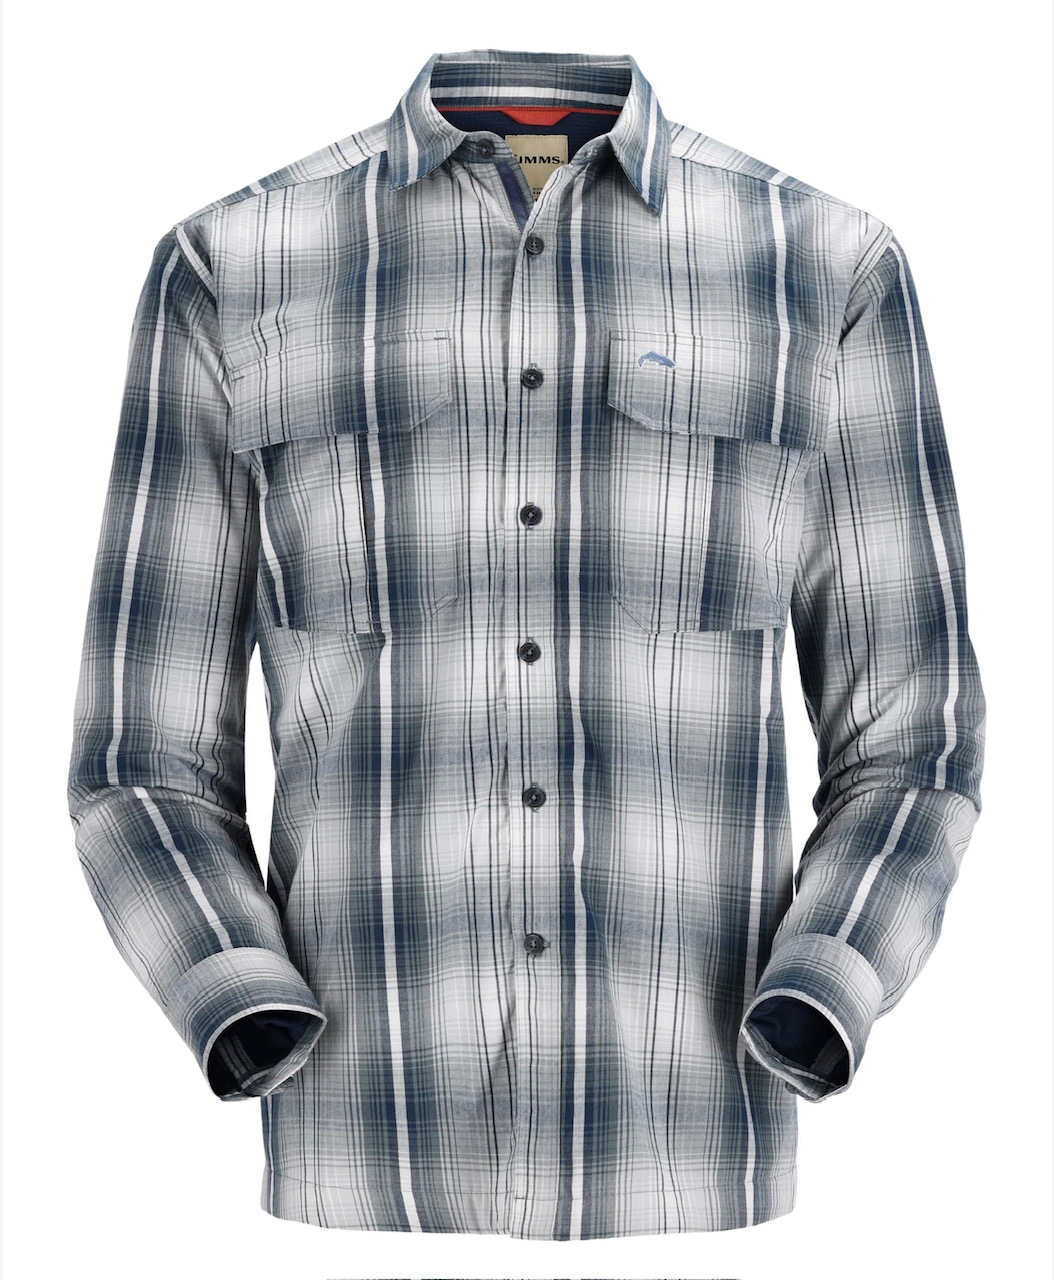 Simms M's Coldweather Shirt - Navy Sterling Plaid - Large